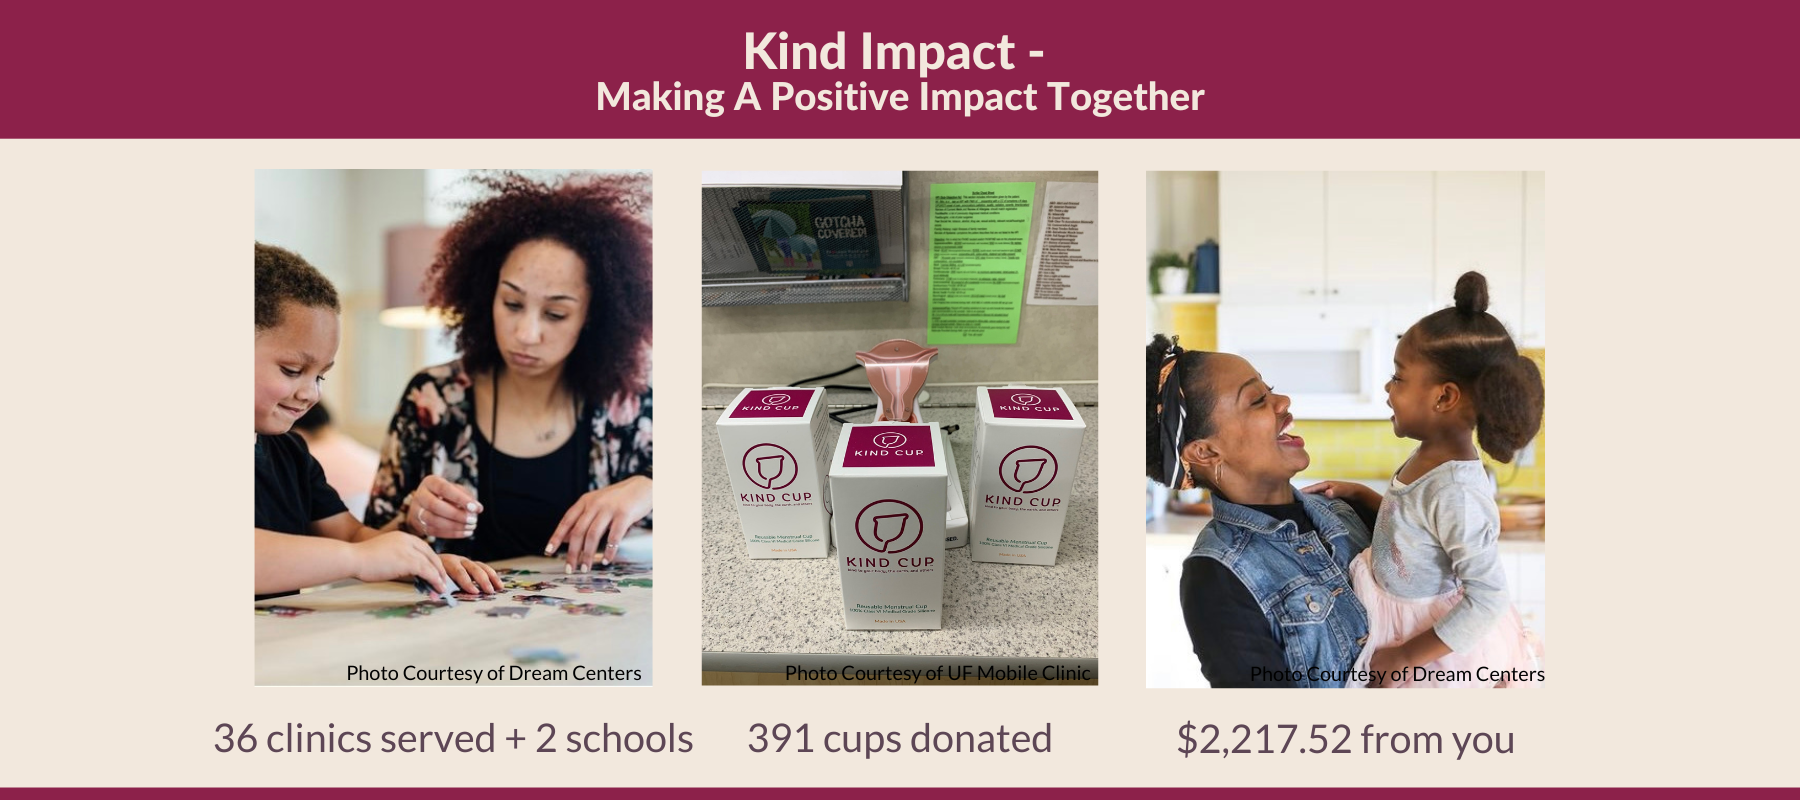 Kind Impact - Making a positive impact together. 36 clinics and 2 schools served, 391 cups donated, $2,217.52 from you. Photos from some of our partner non-profit clinics.